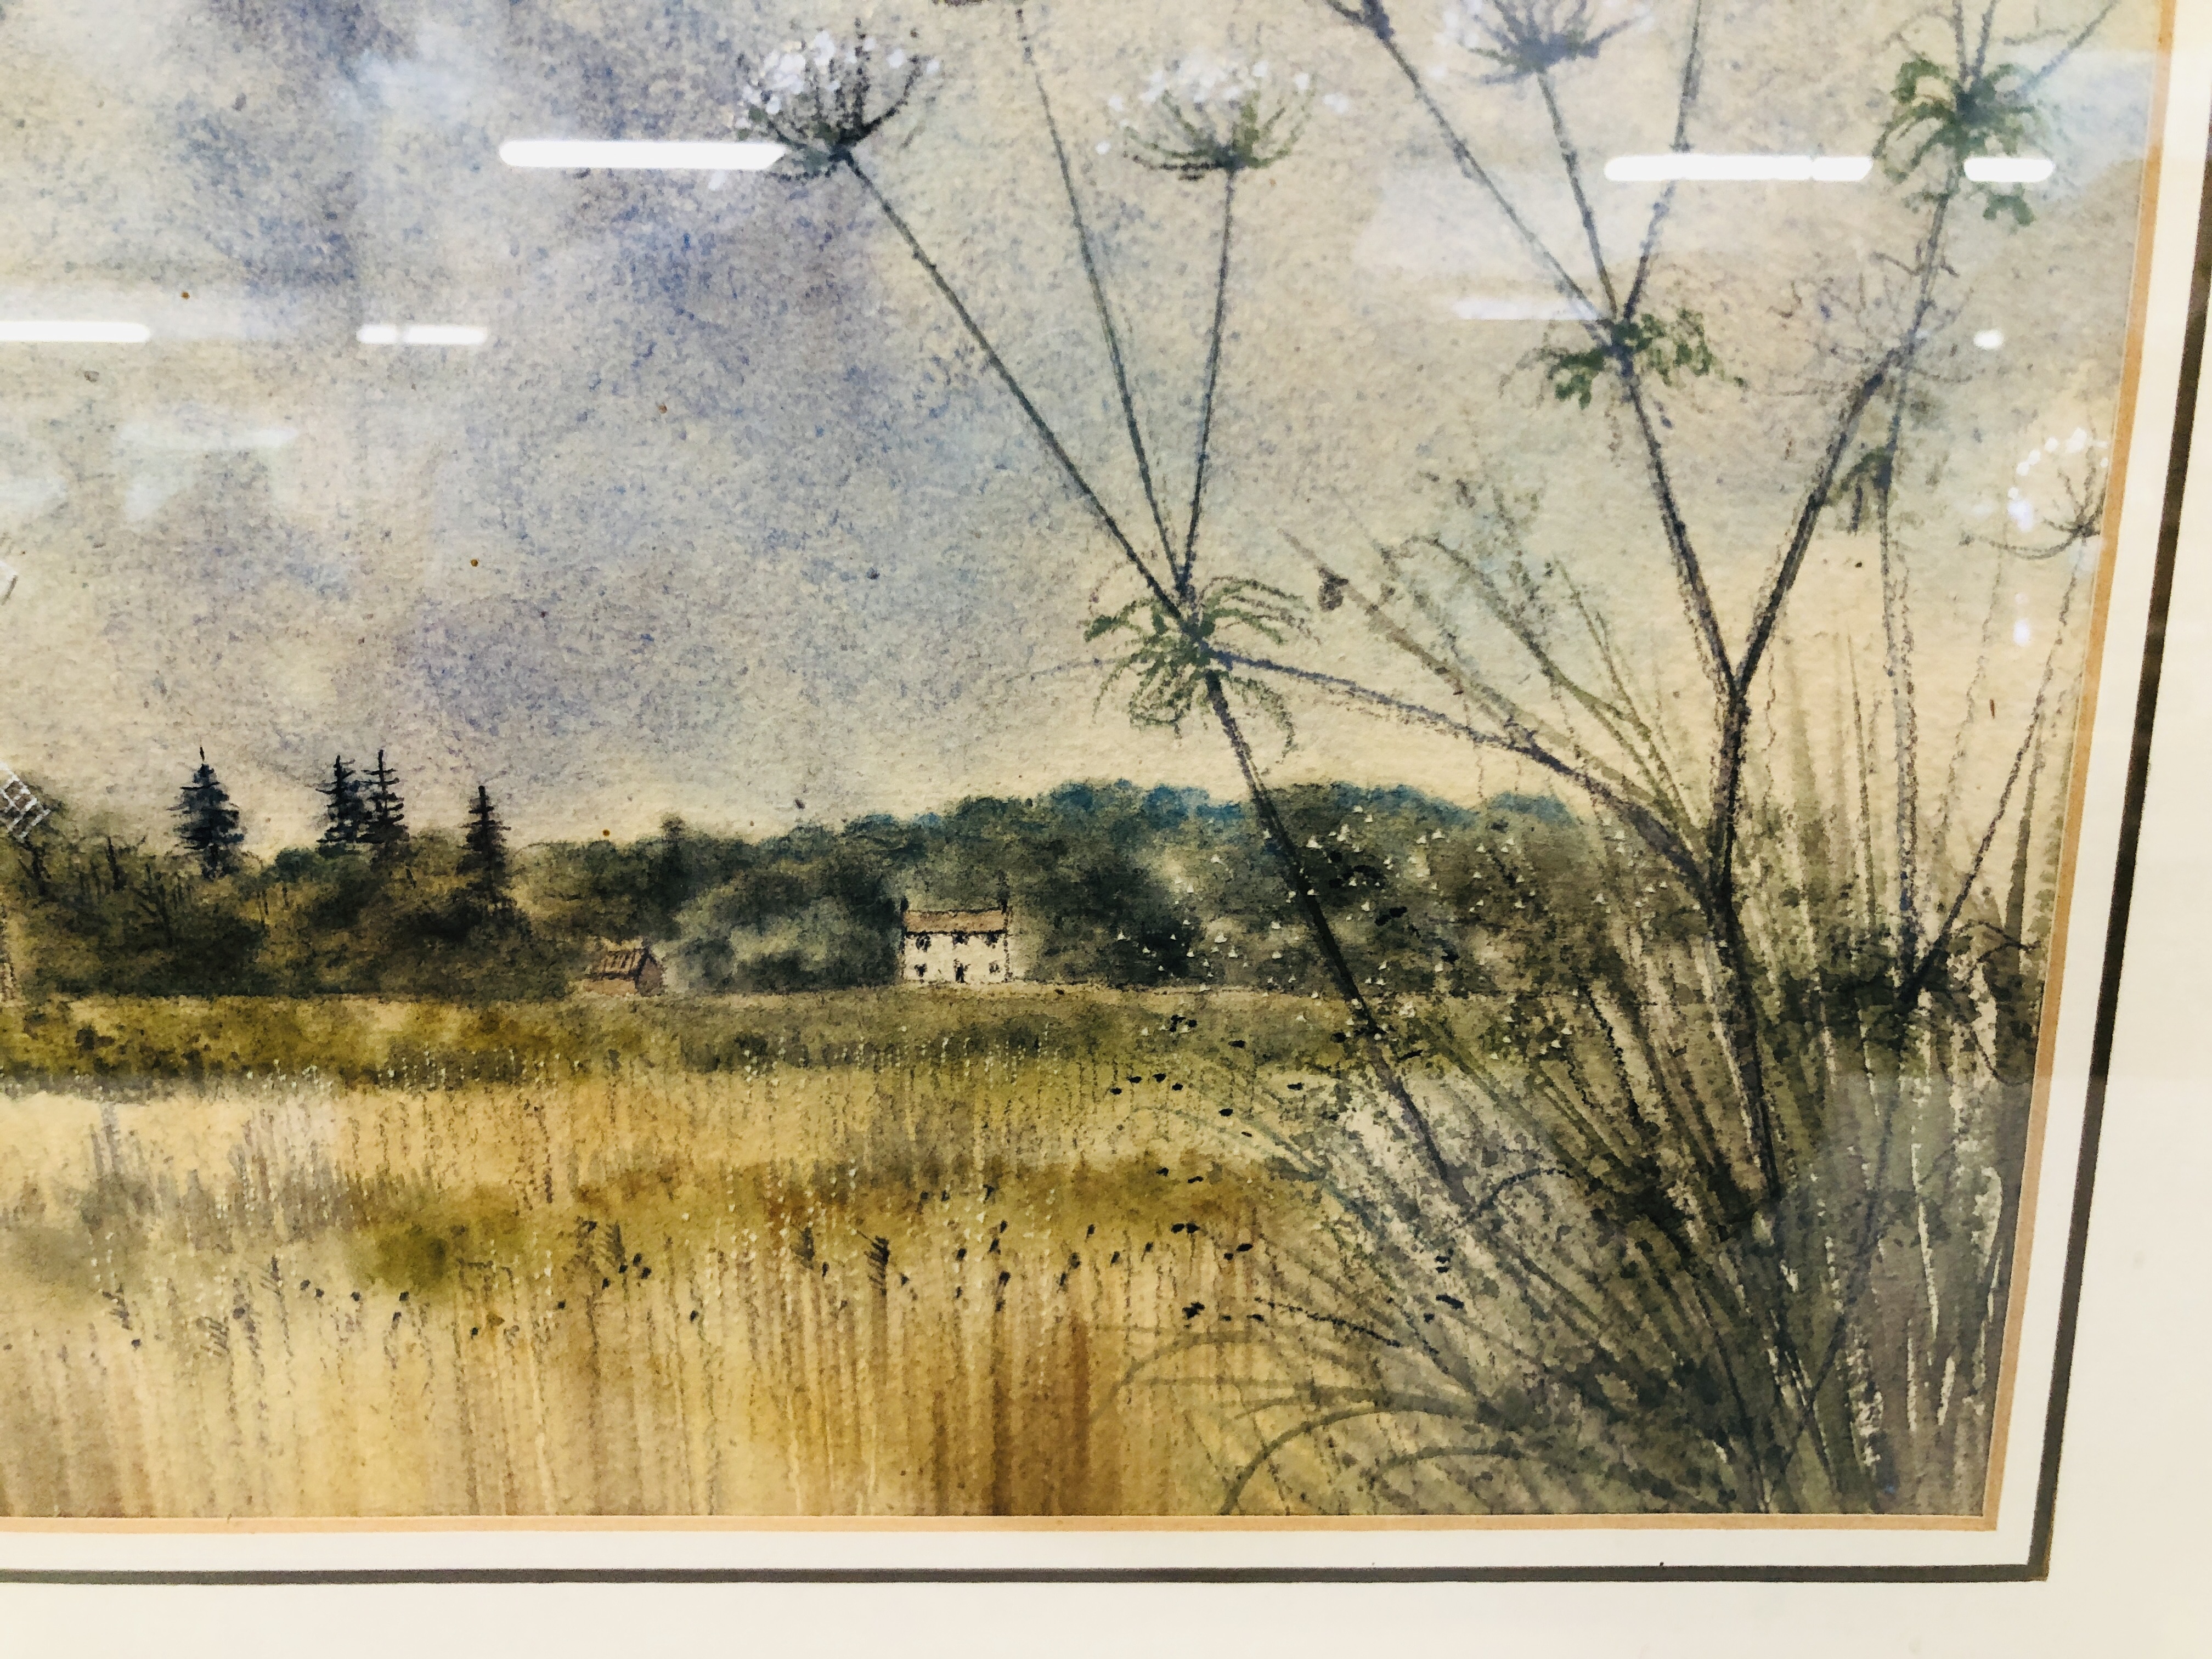 FRAMED WATERCOLOUR "CLEY MILL, JUNE" BEARING SIGNATURE PETER SOLLY WIDTH 35CM. HEIGHT 23.5CM. - Image 5 of 9